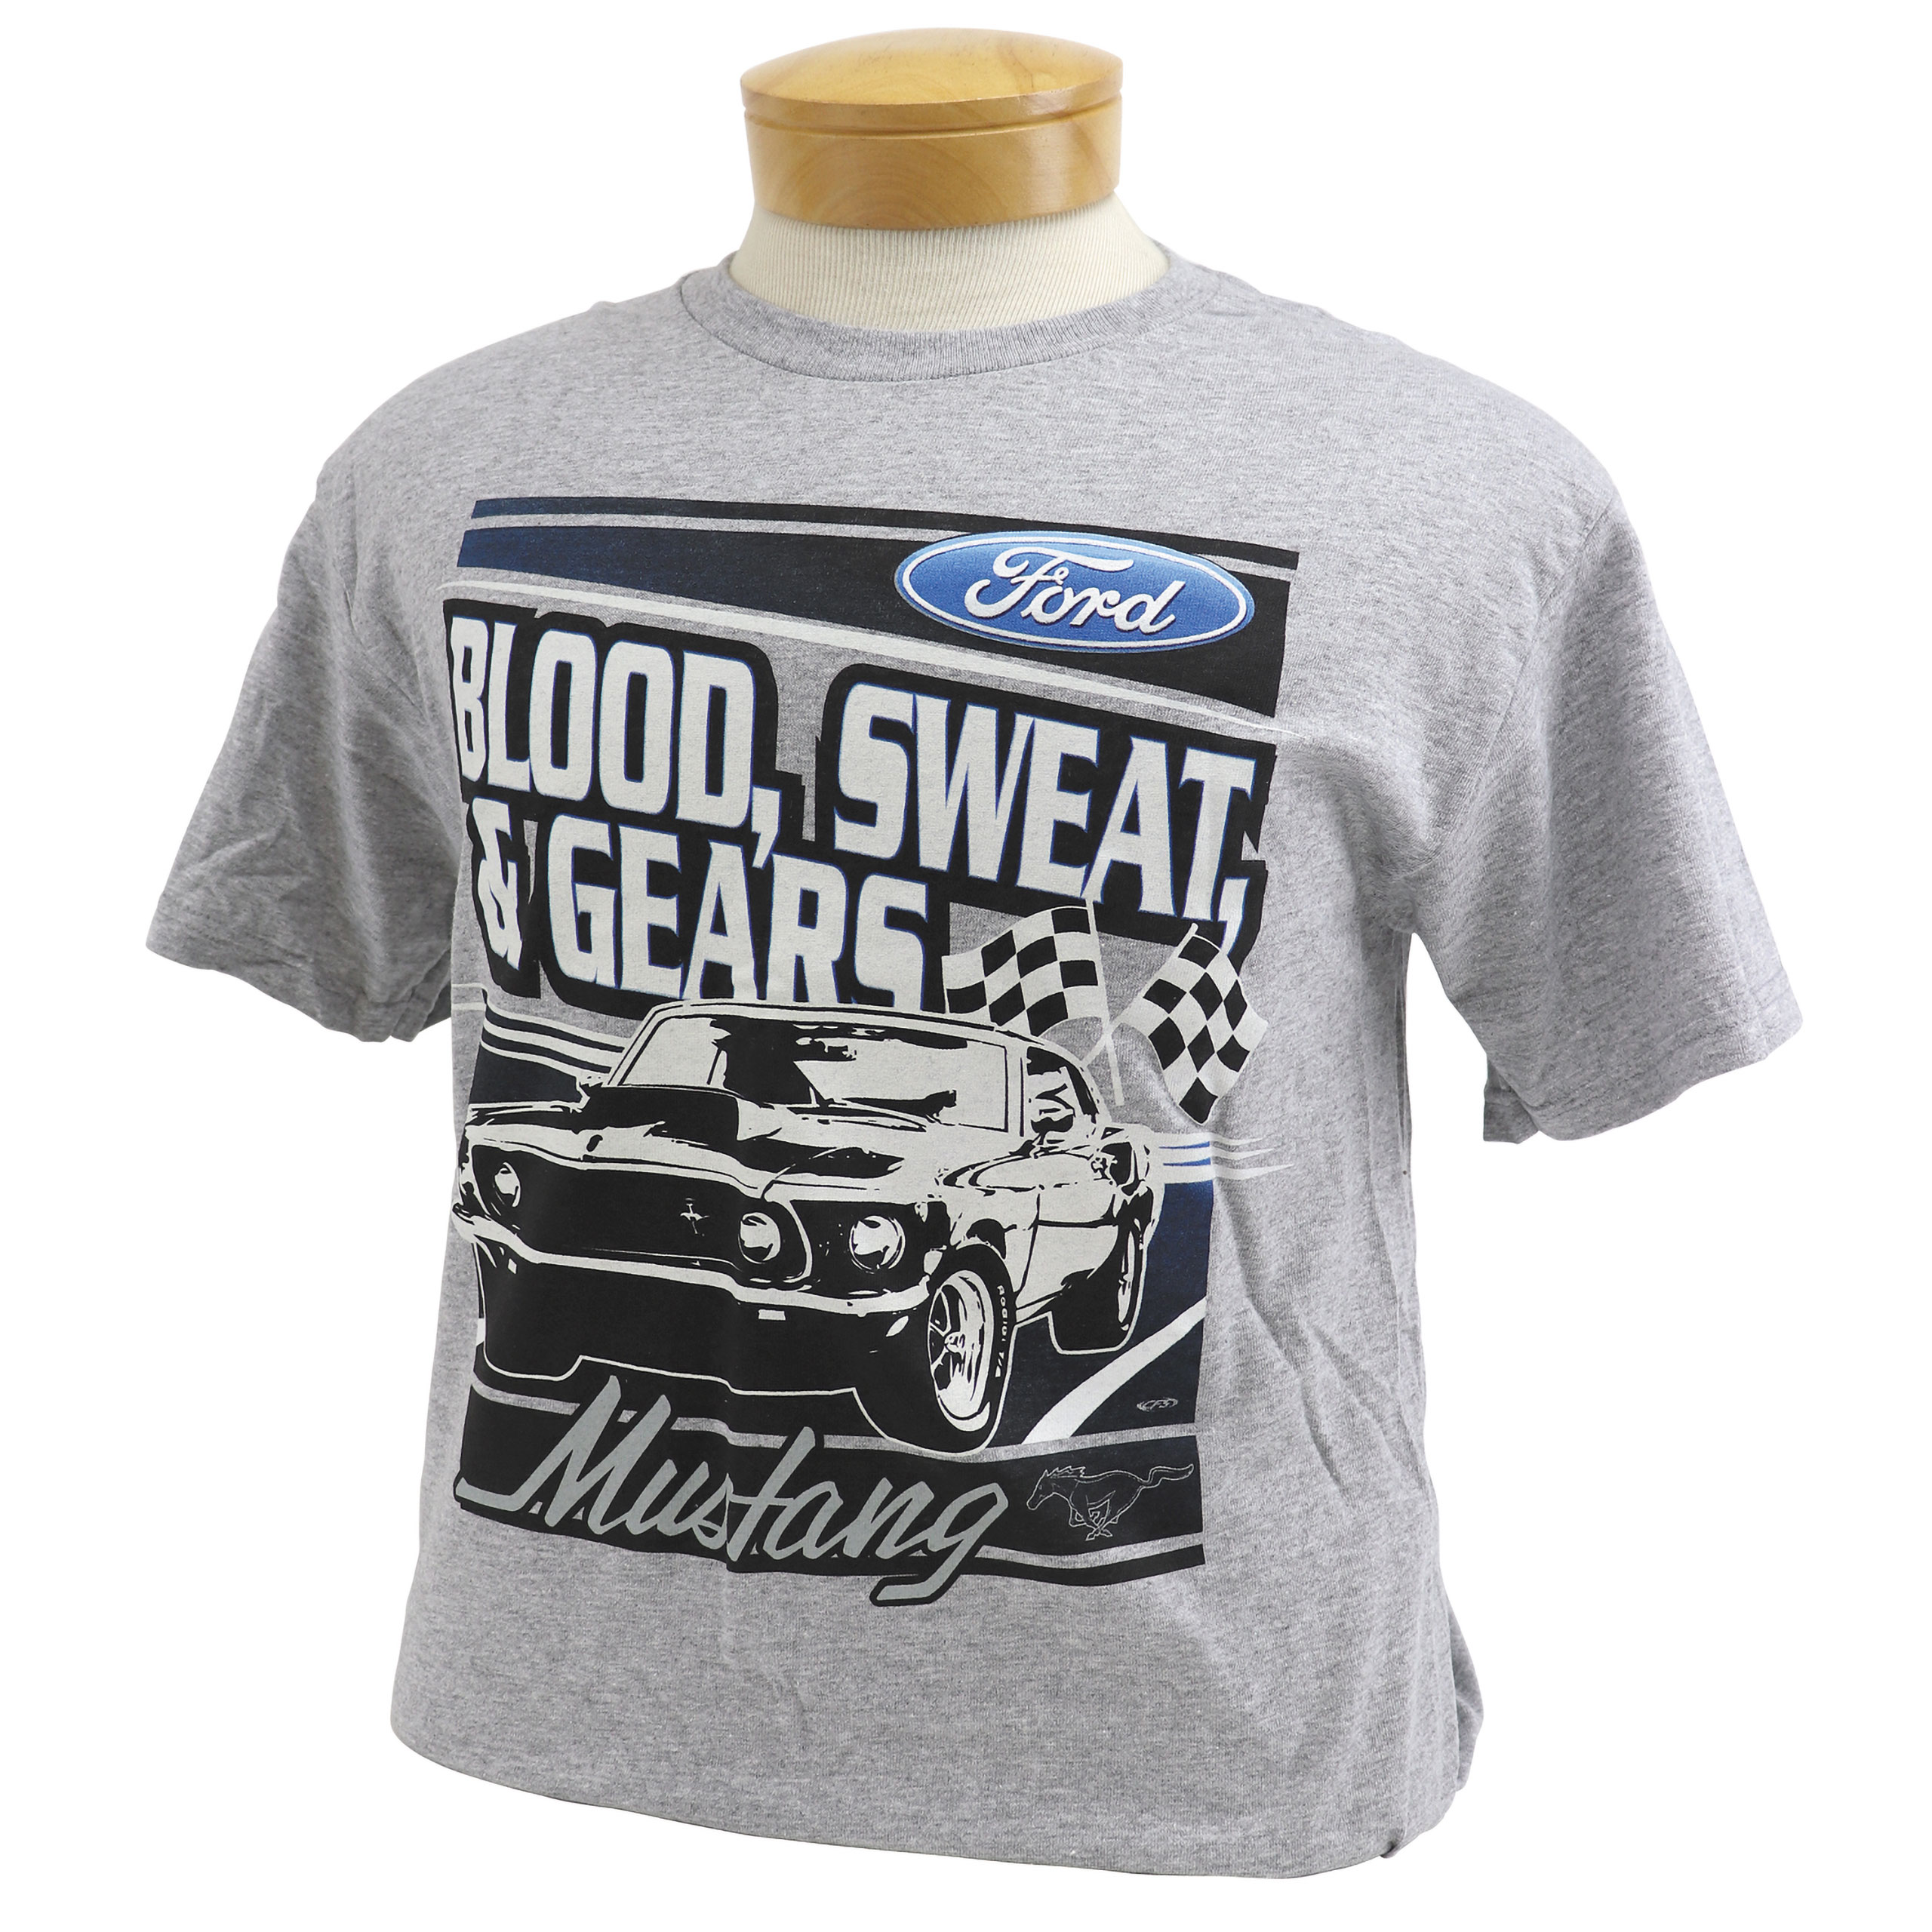 1953-2021 Ford T-SHIRT BLOOD, SWEAT, & GEARS GRA - Auto Accessories of America